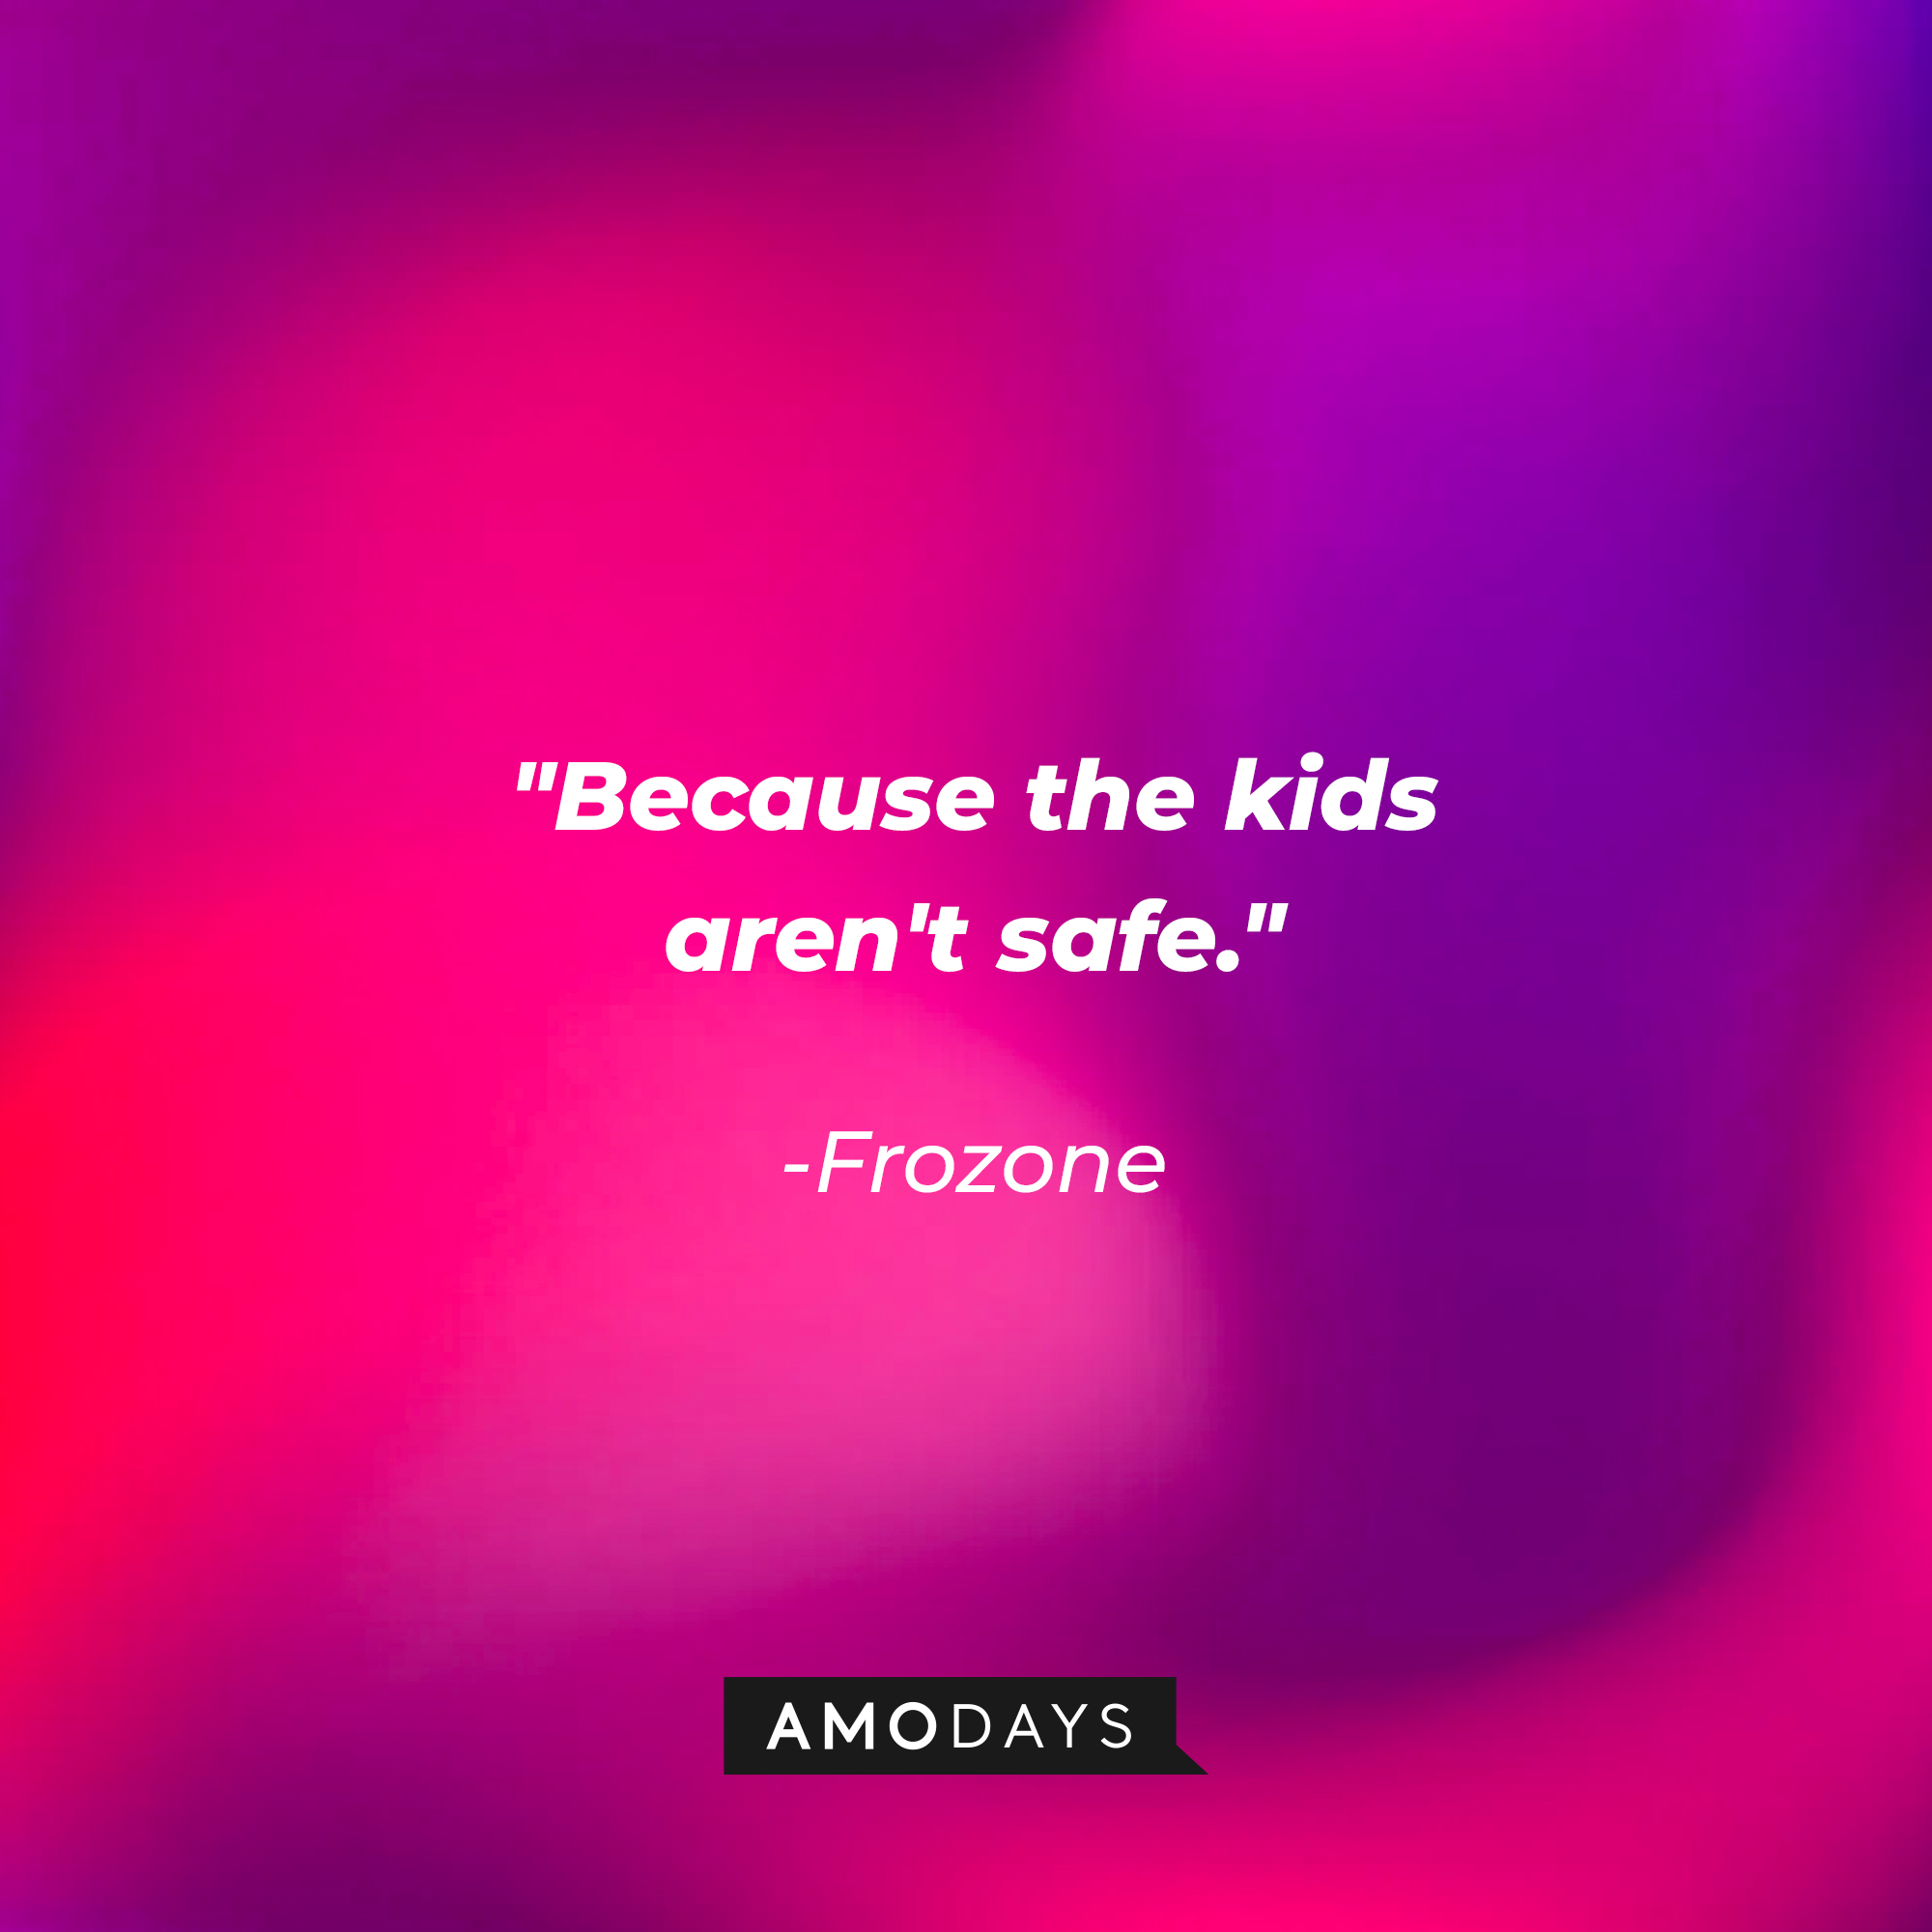 Frozone's quote: "Because the kids aren't safe" | Source: Amodays